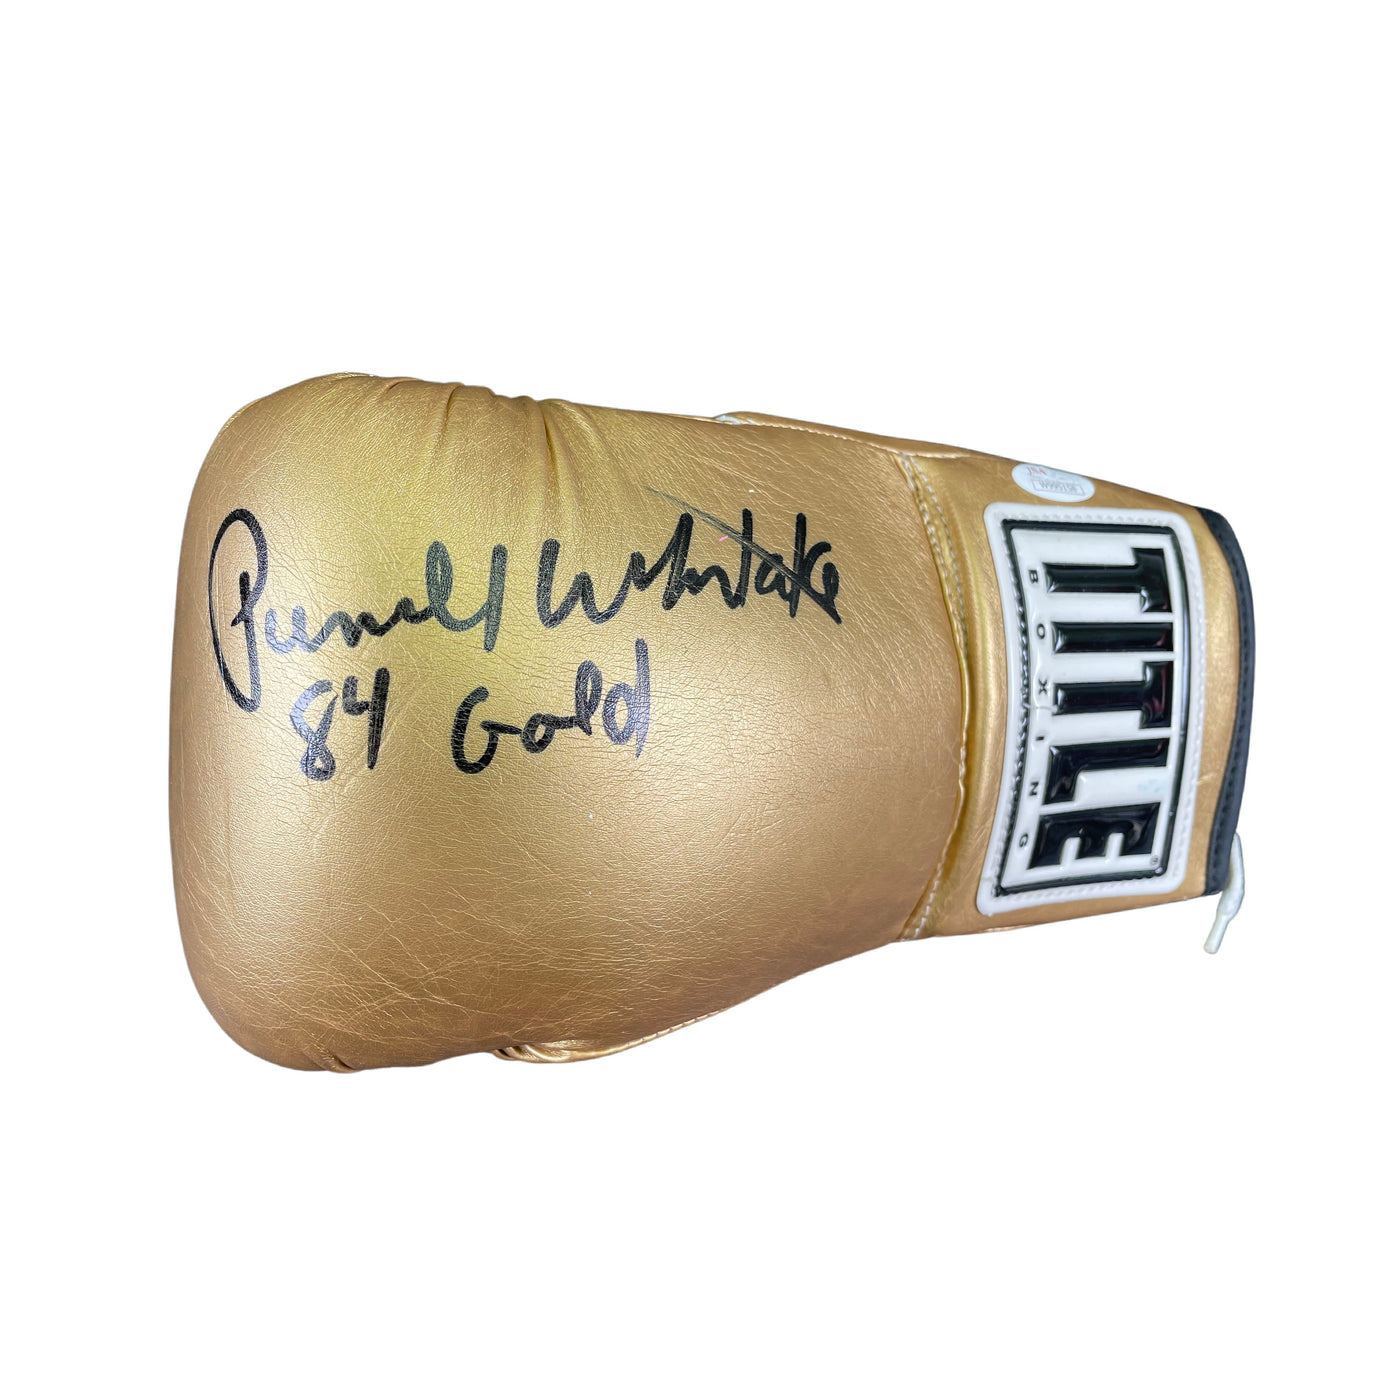 Pernell Whitaker Autographed Golden Glove Boxing Glove Rare Signed JSA COA 2